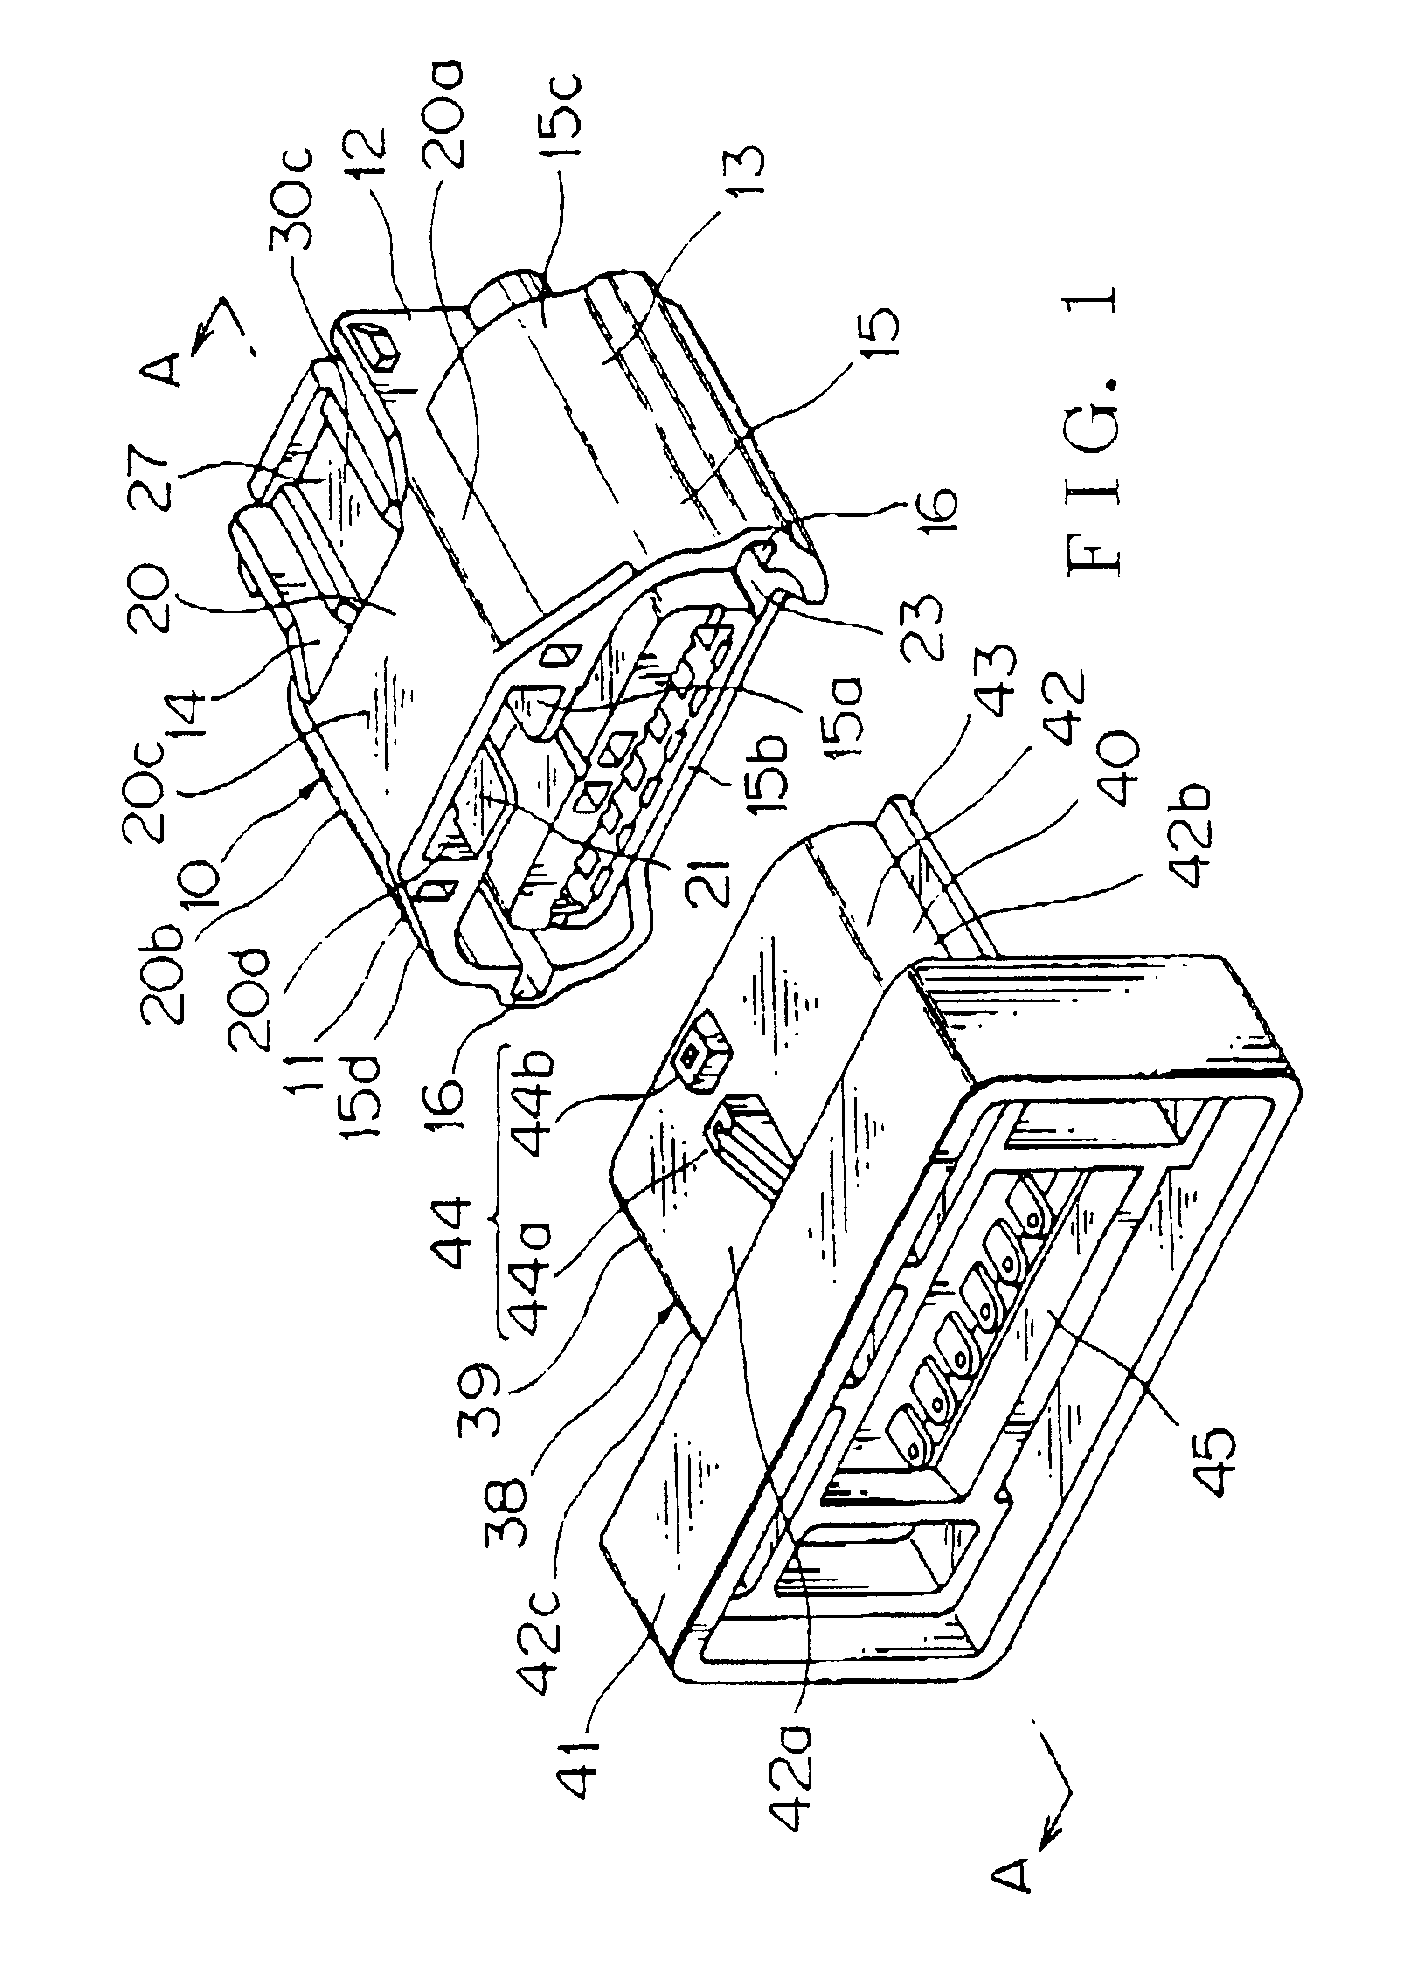 Locking mechanism for connector